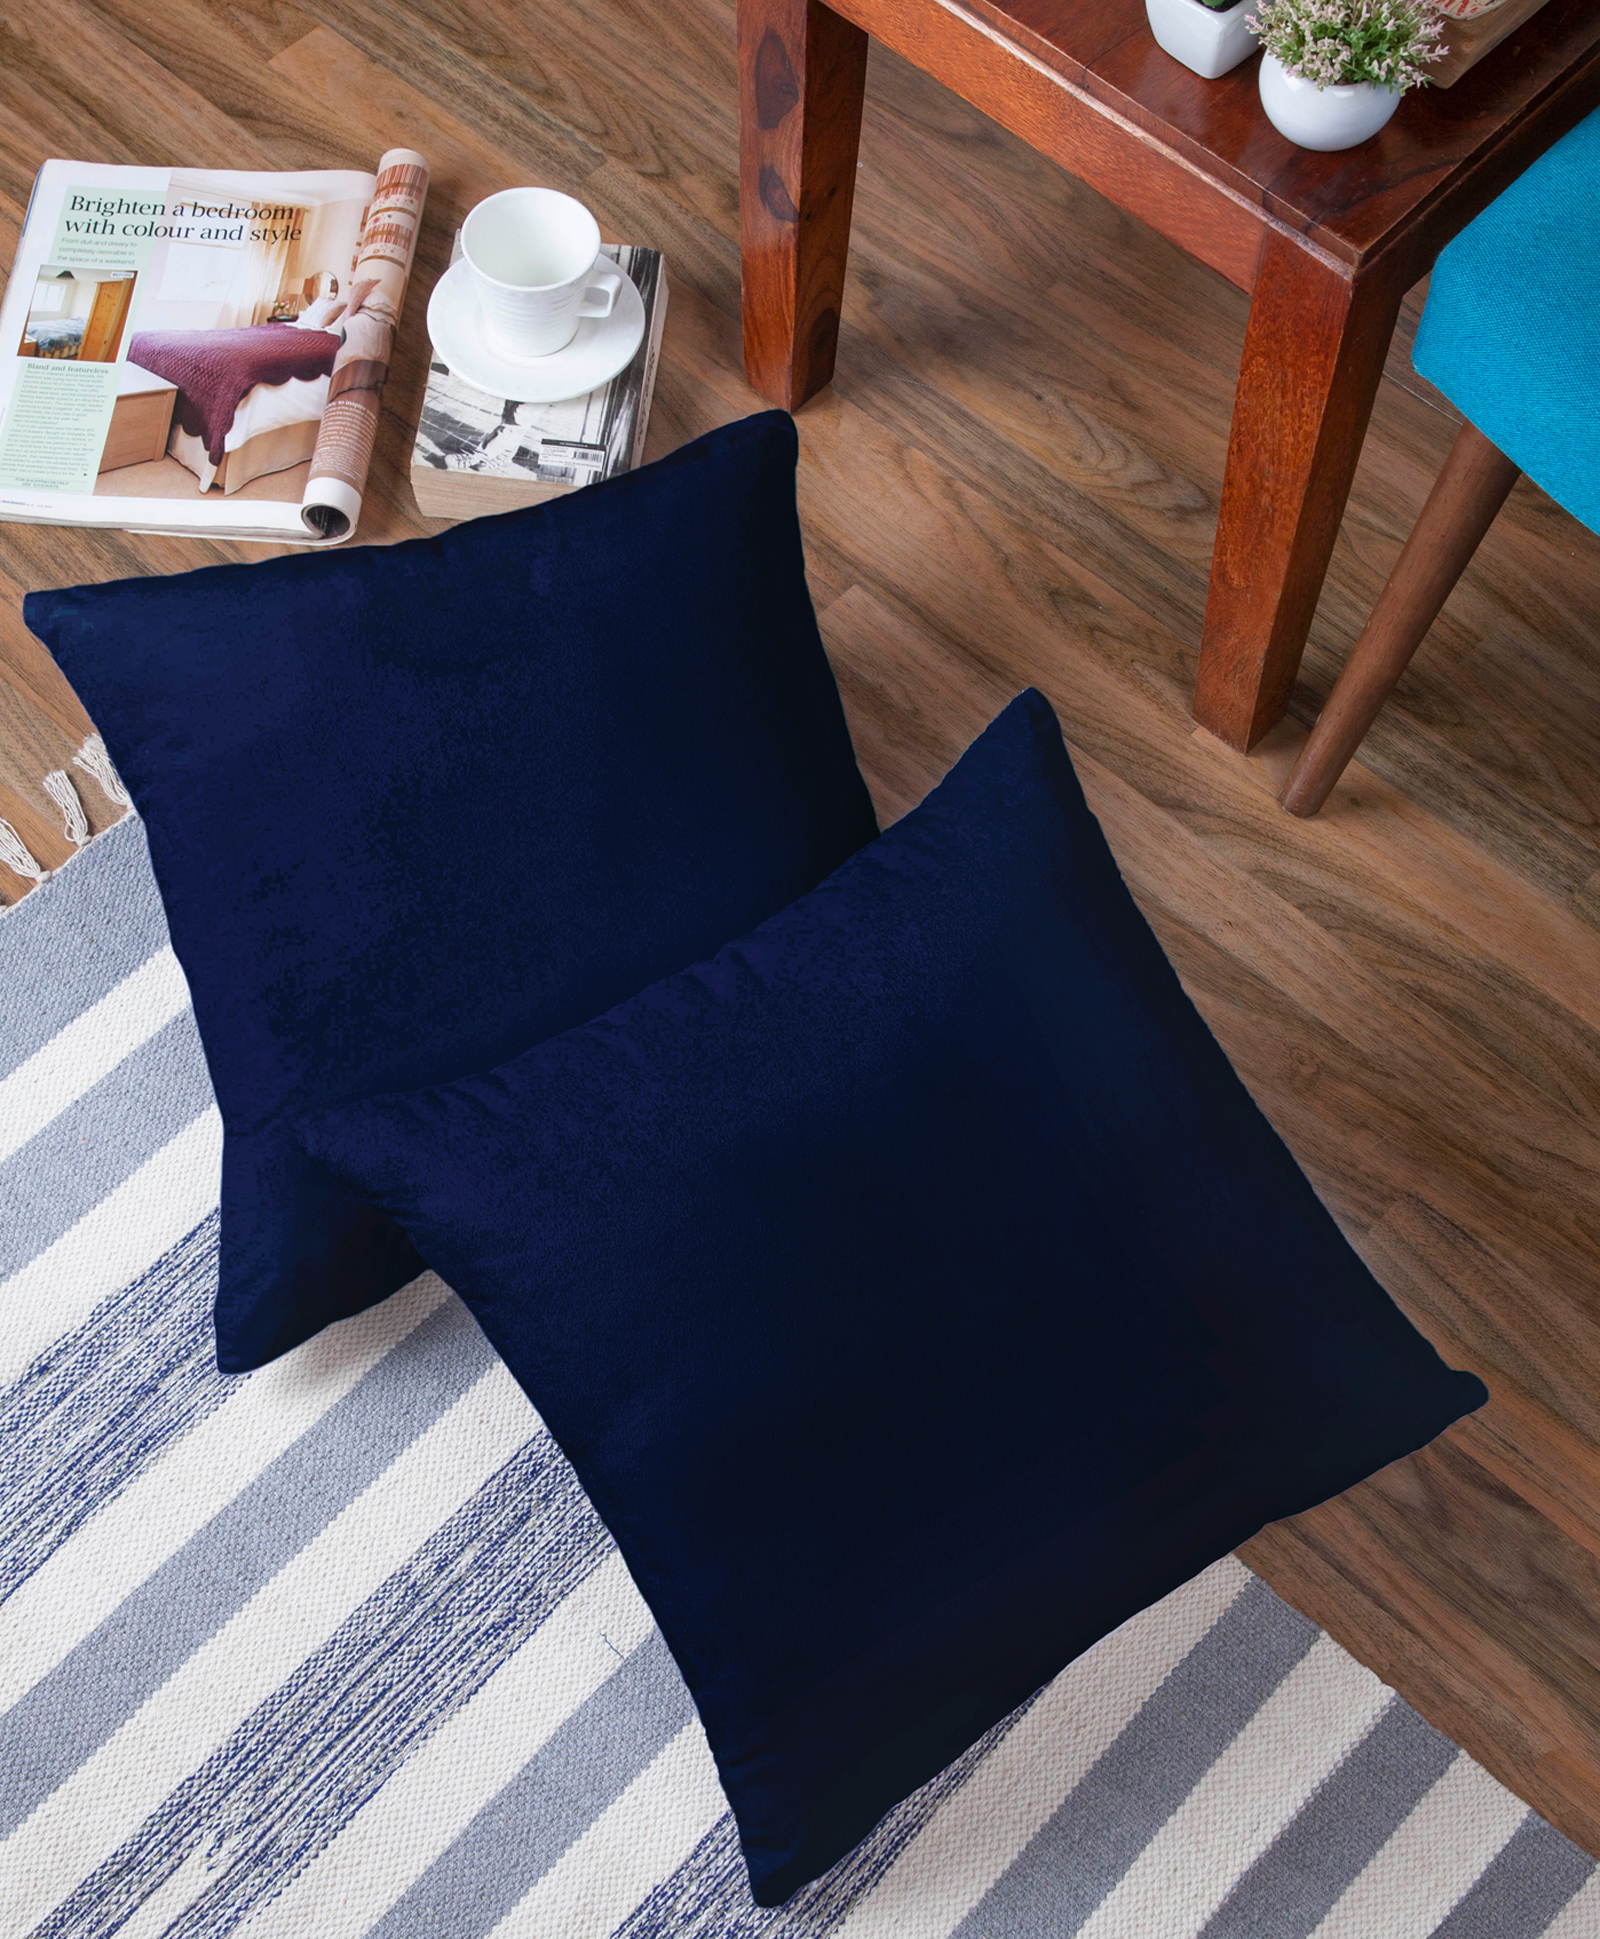 24 x 24 inch / 60 x 60 cm Solid Plain Dyed Soft & Smooth Chair,Bed Navy Blue Made in India Encasa Homes Velvet Throw Pillow Cushion Cover 2 pcs Set Square Accent Decorative Pillowcase for Couch 